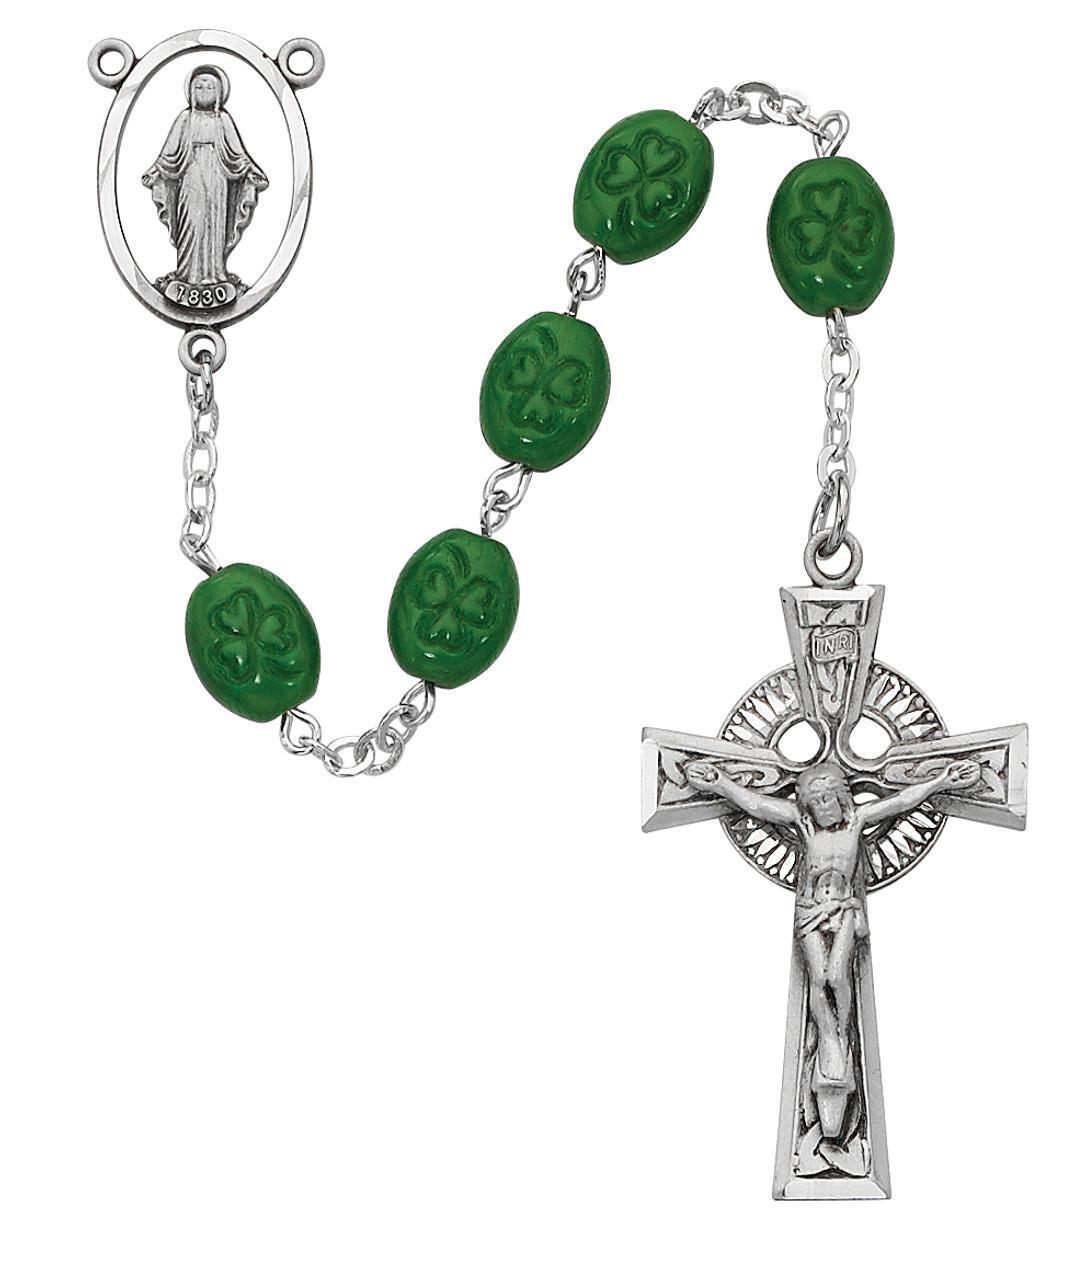 6x8mm Oval Green Rhinestone Rosary Comes in a Deluxe Gift Box